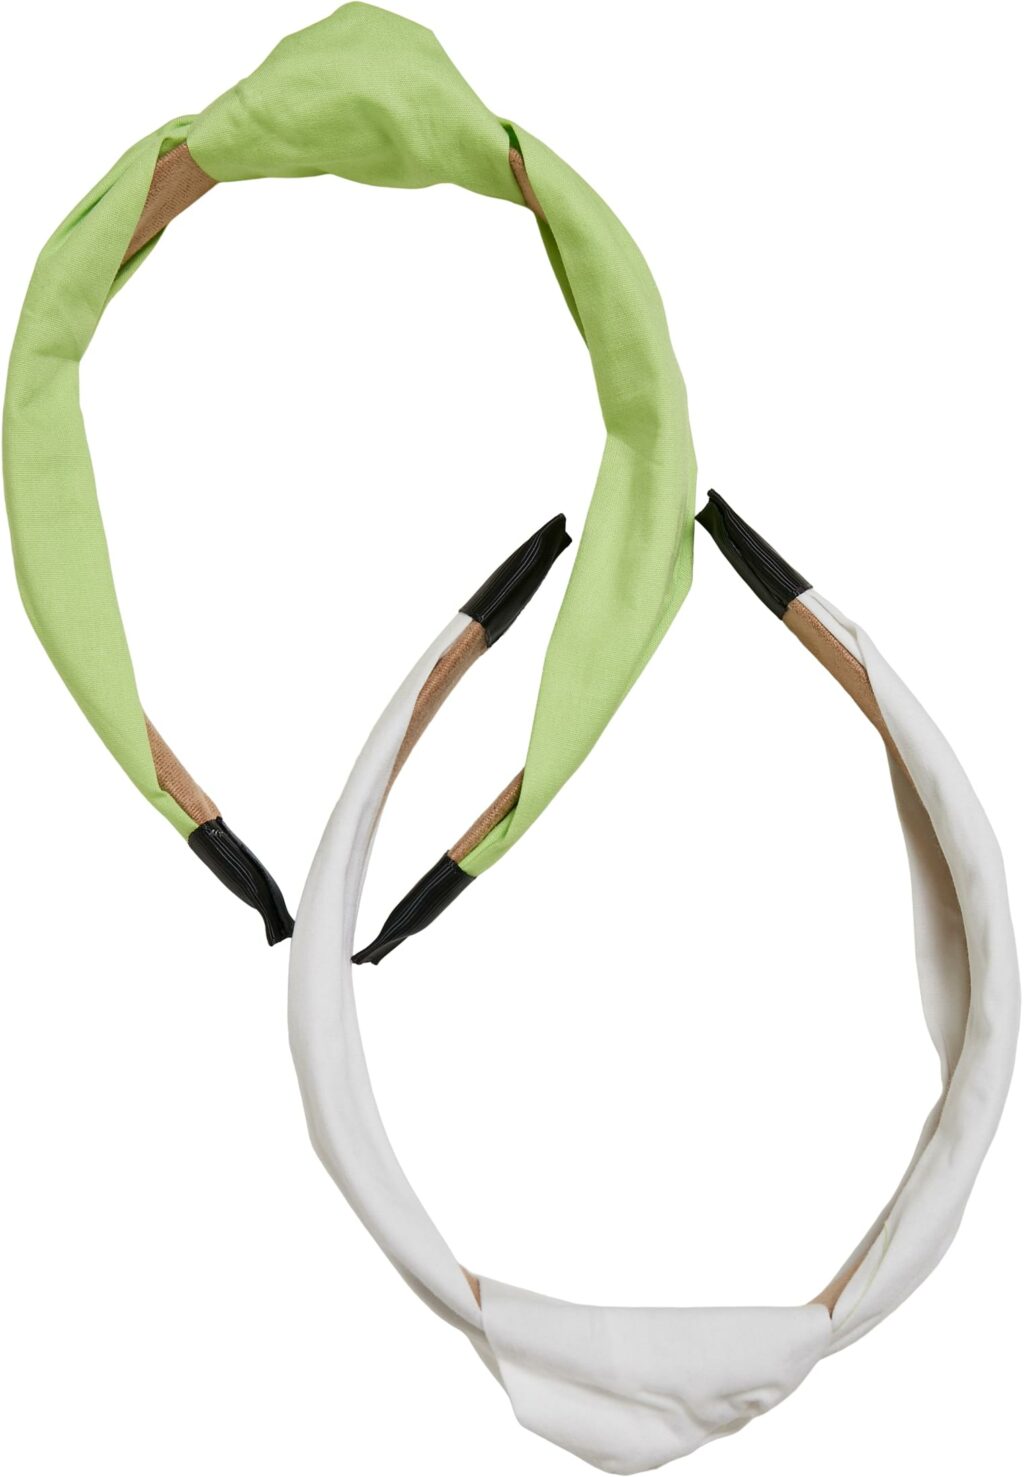 Light Headband With Knot 2-Pack lightmint/white one TB5126